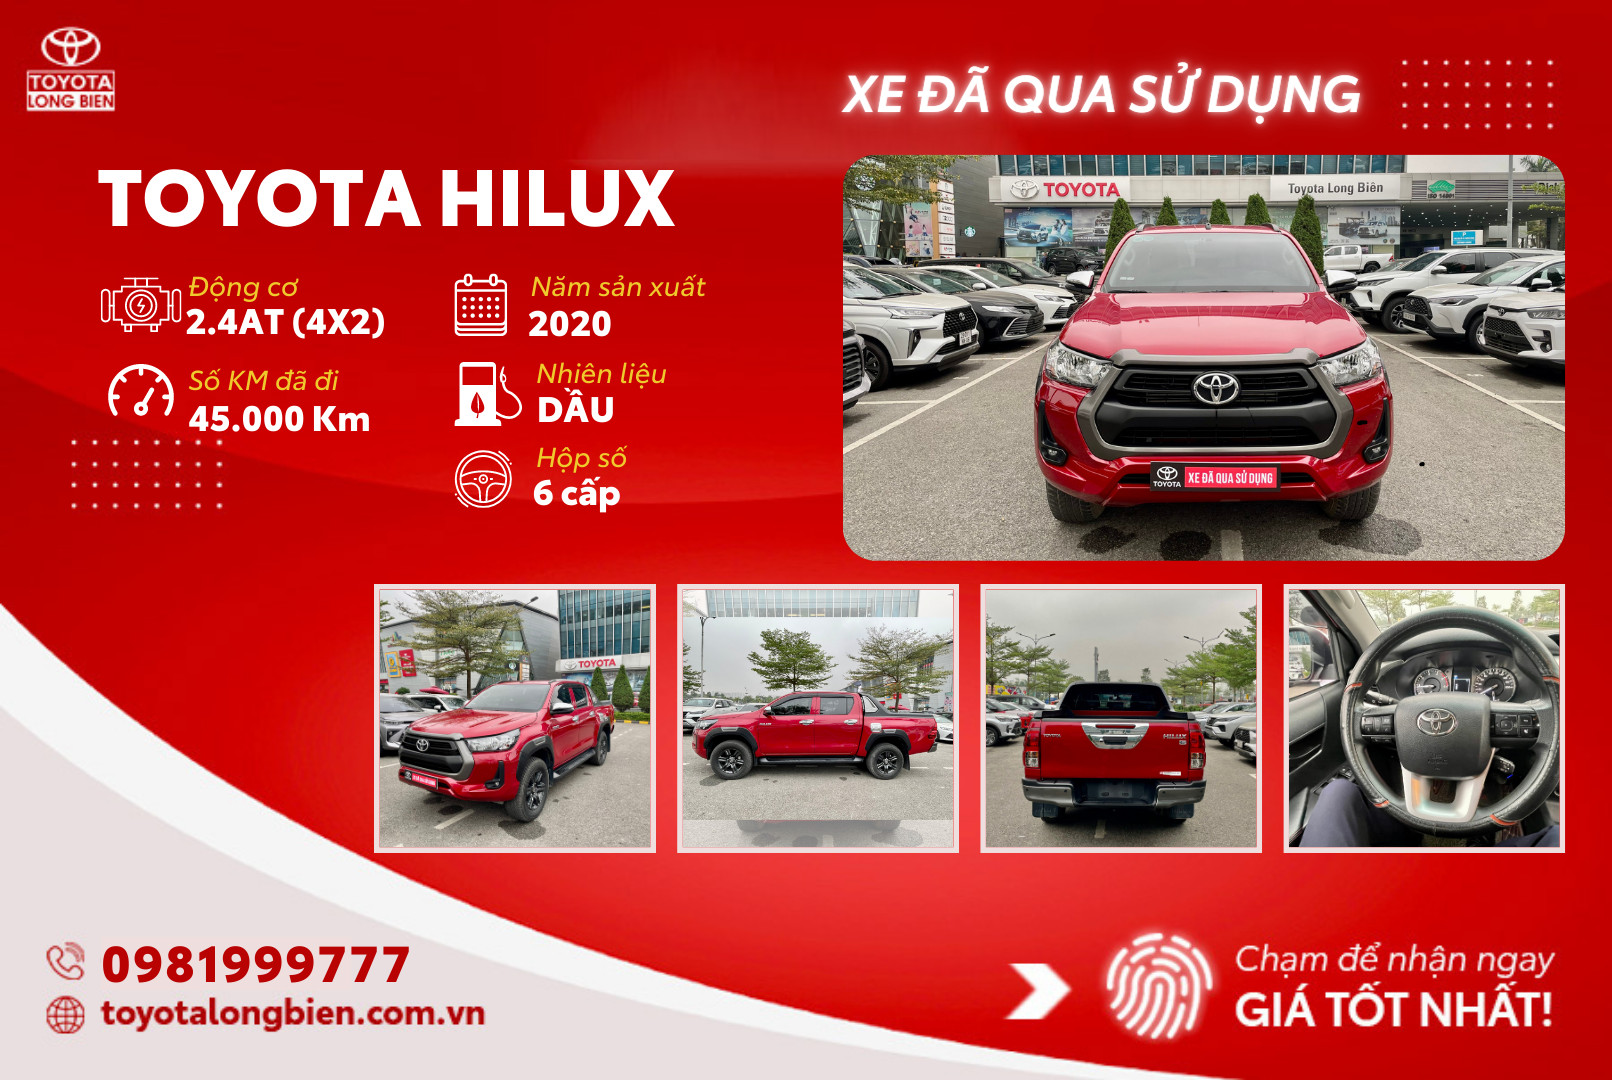 xe cũ toyota hilux 2.4AT